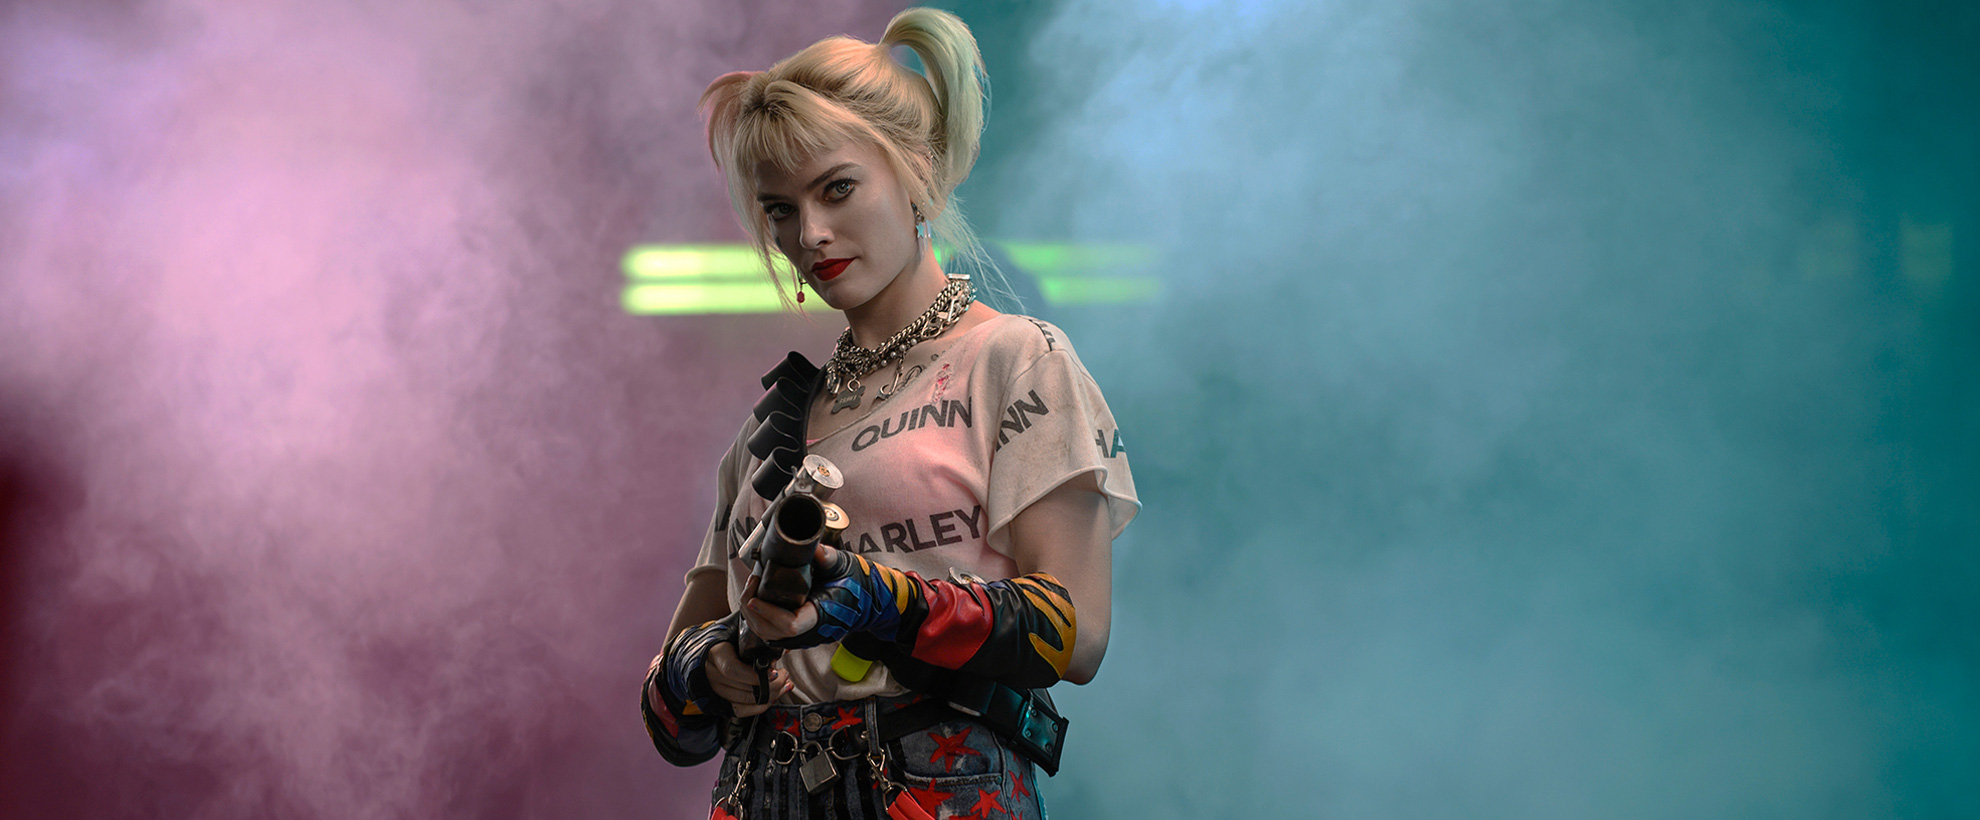 Margot Robbie as Harley Quinn, pointing a gun down the camera with pink and blue smoke in the background